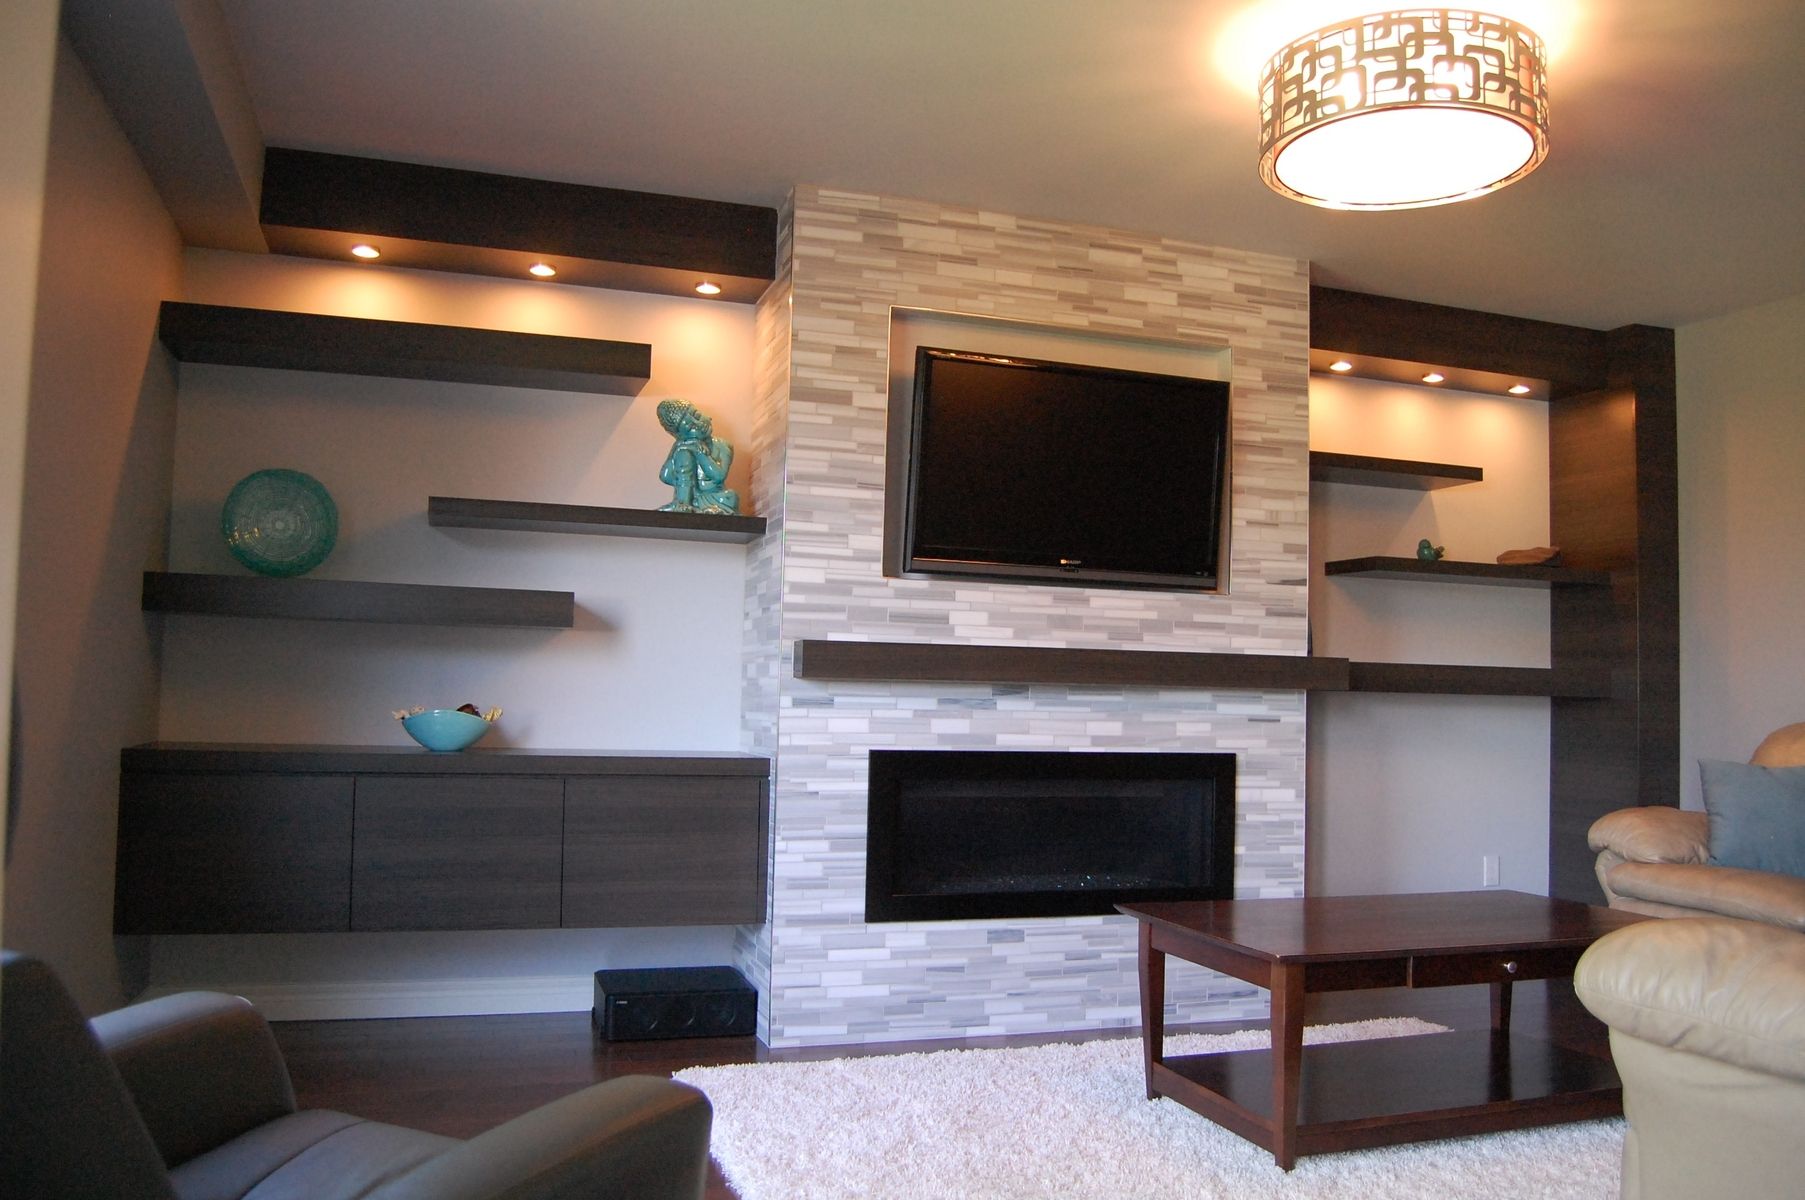 Shelf Above Fireplace Best Of Custom Modern Wall Unit Made Pletely From A Printed